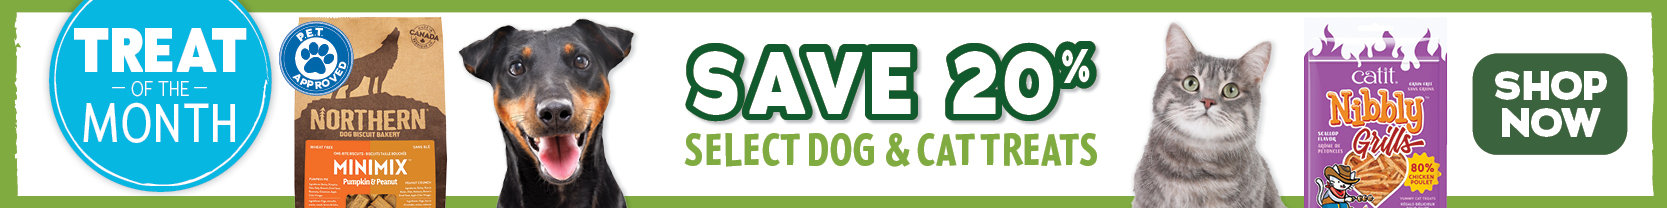 July Treat of the month - Save 20% on select dog and cat treats - shop now